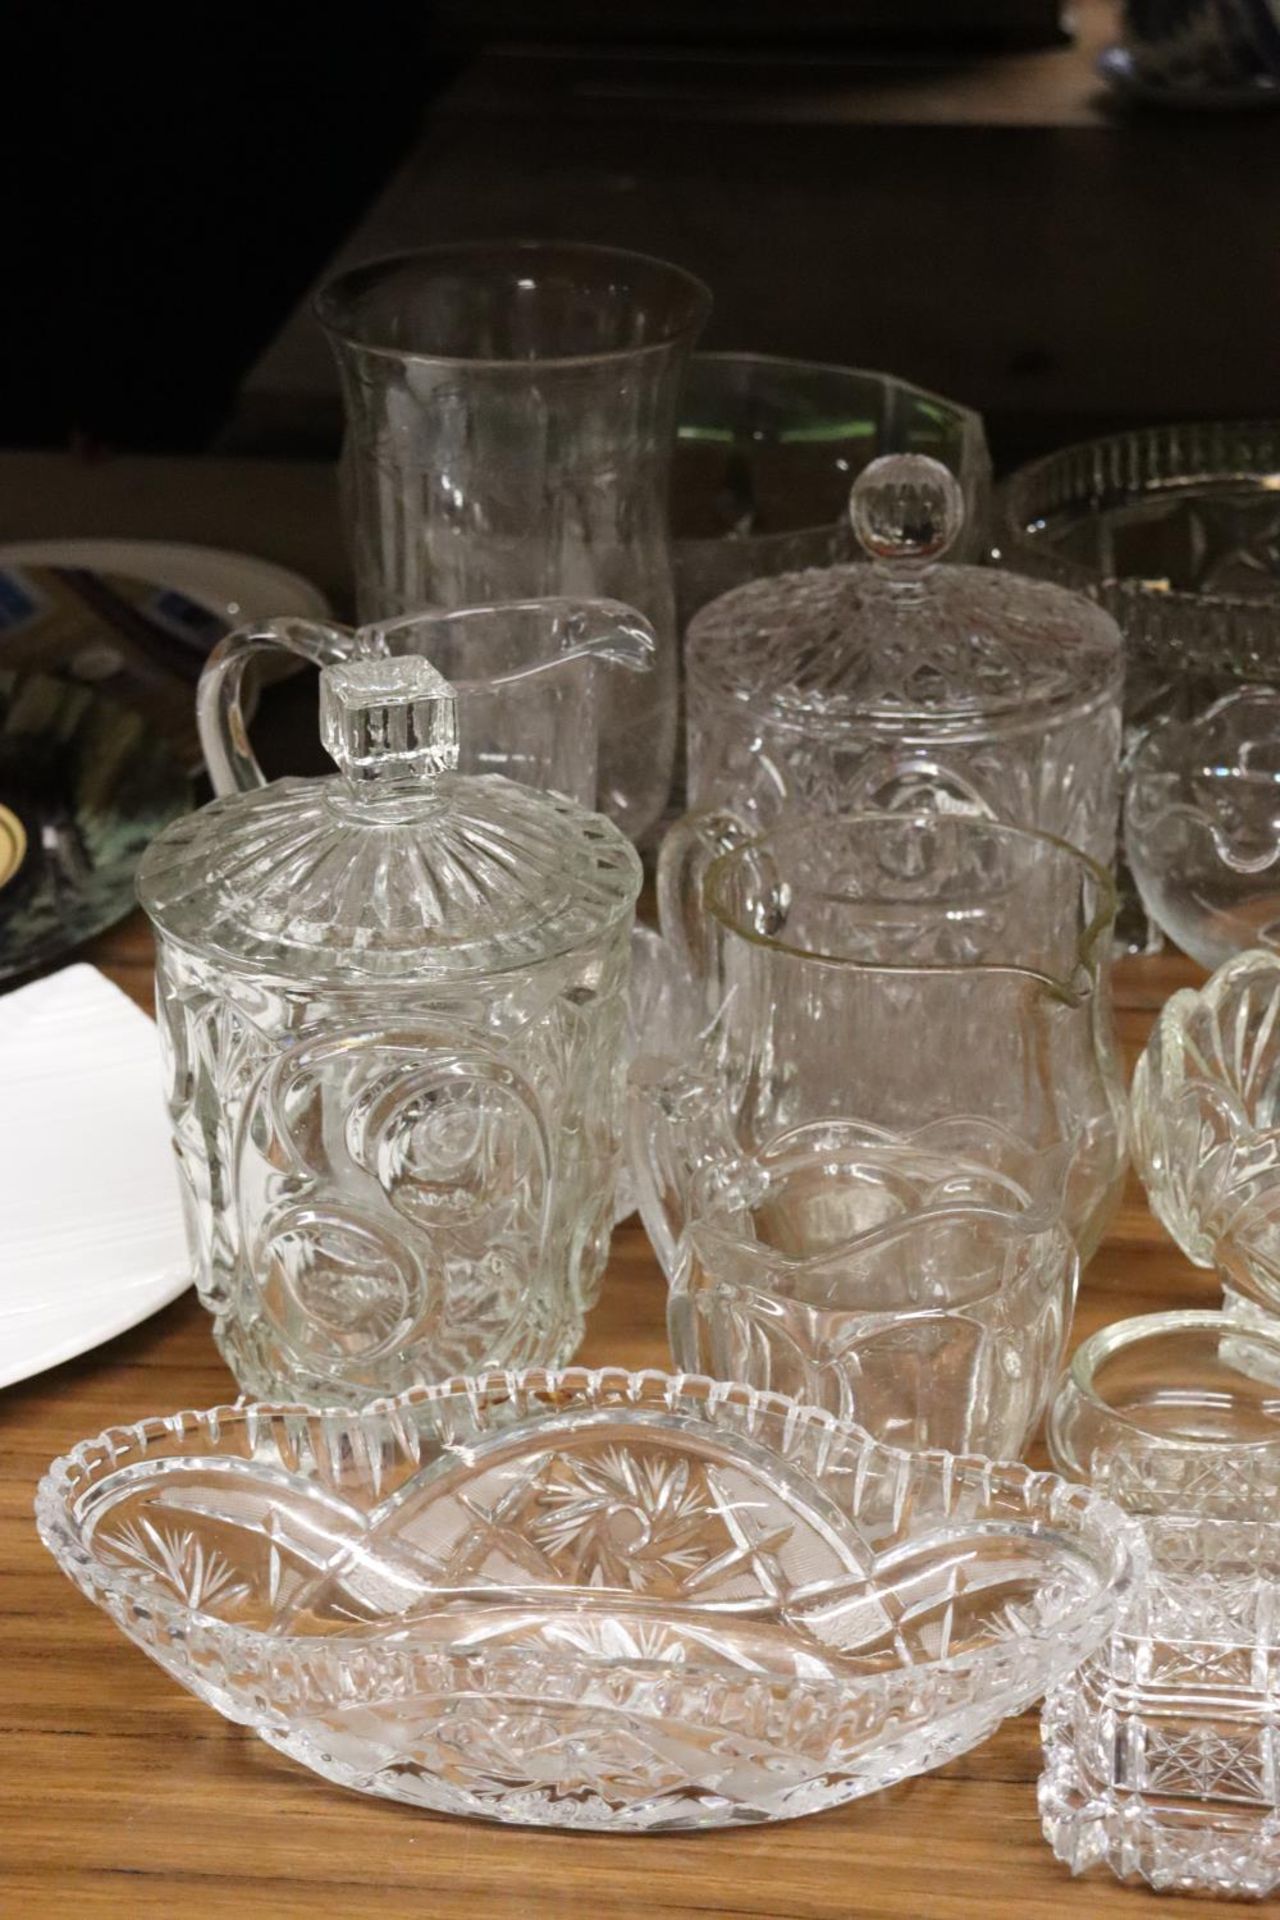 A LARGE QUANTITY OF GLASSWARE TO INCLUDE BOWLS, JUGS, LIDDED CONTAINERS, ETC - Image 2 of 5